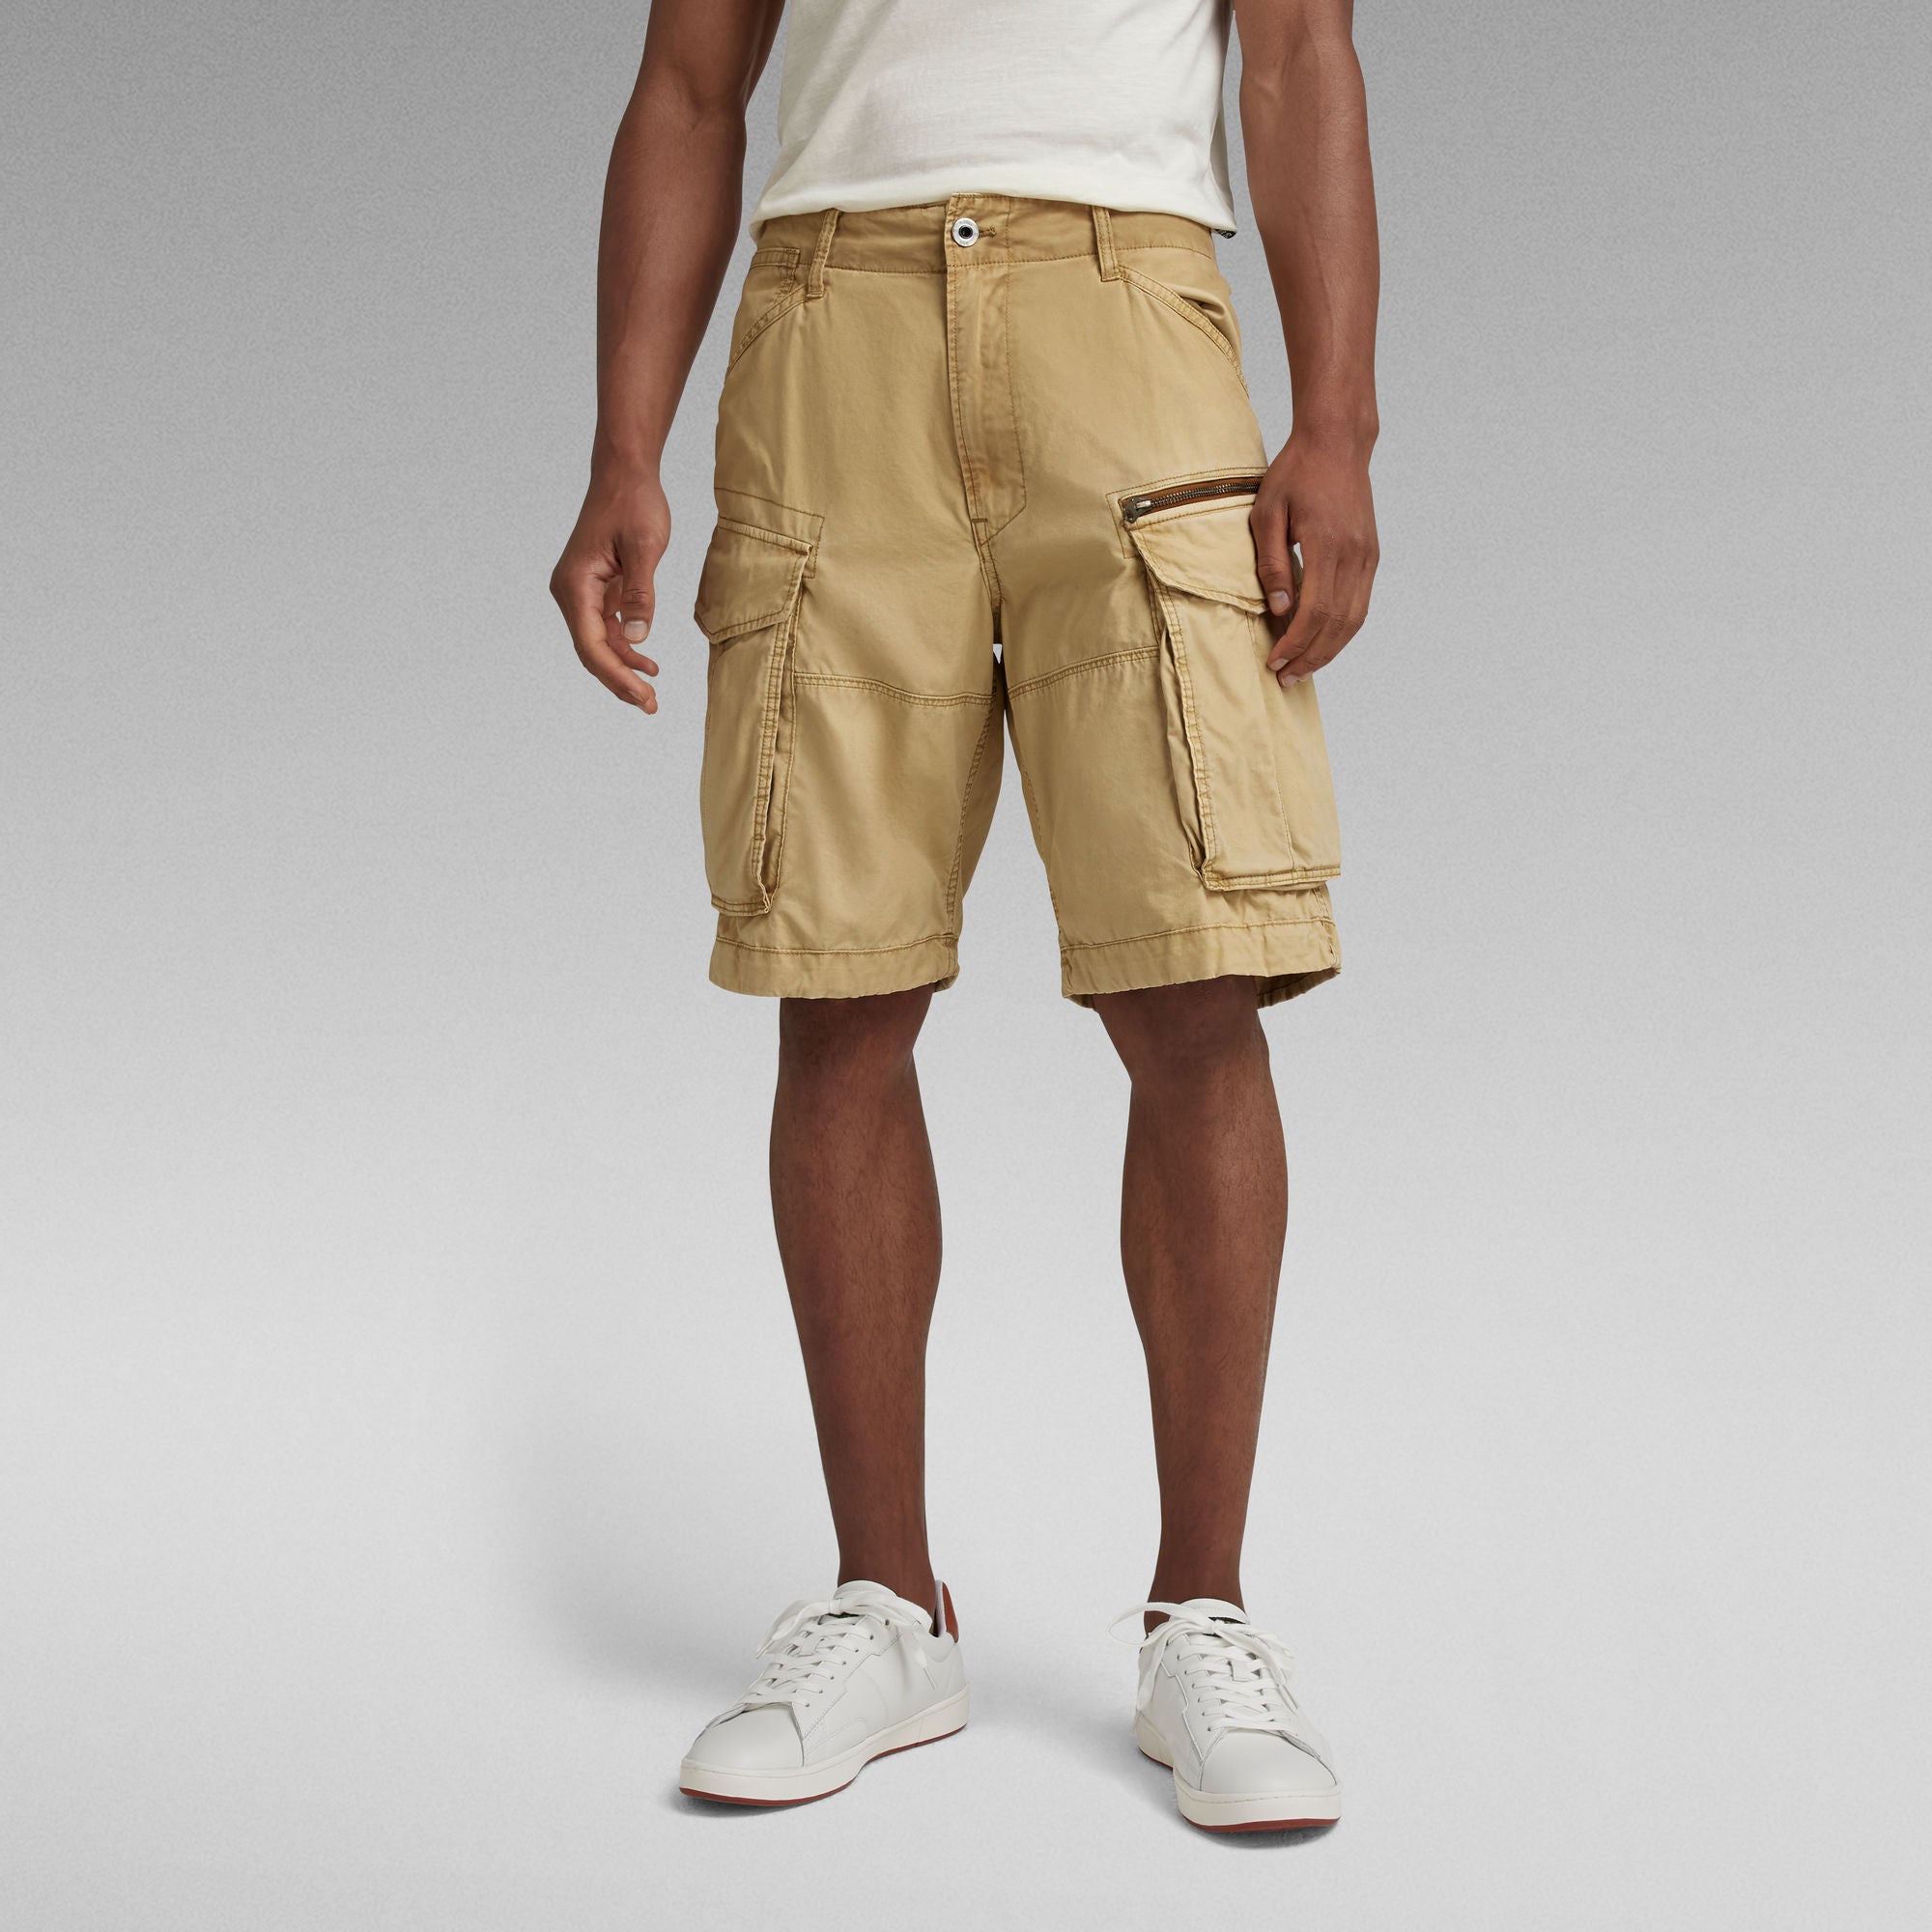 Buy Star Hemp Vintage Rovic Zip Cargo Short at In Style – InStyle-Tuscaloosa